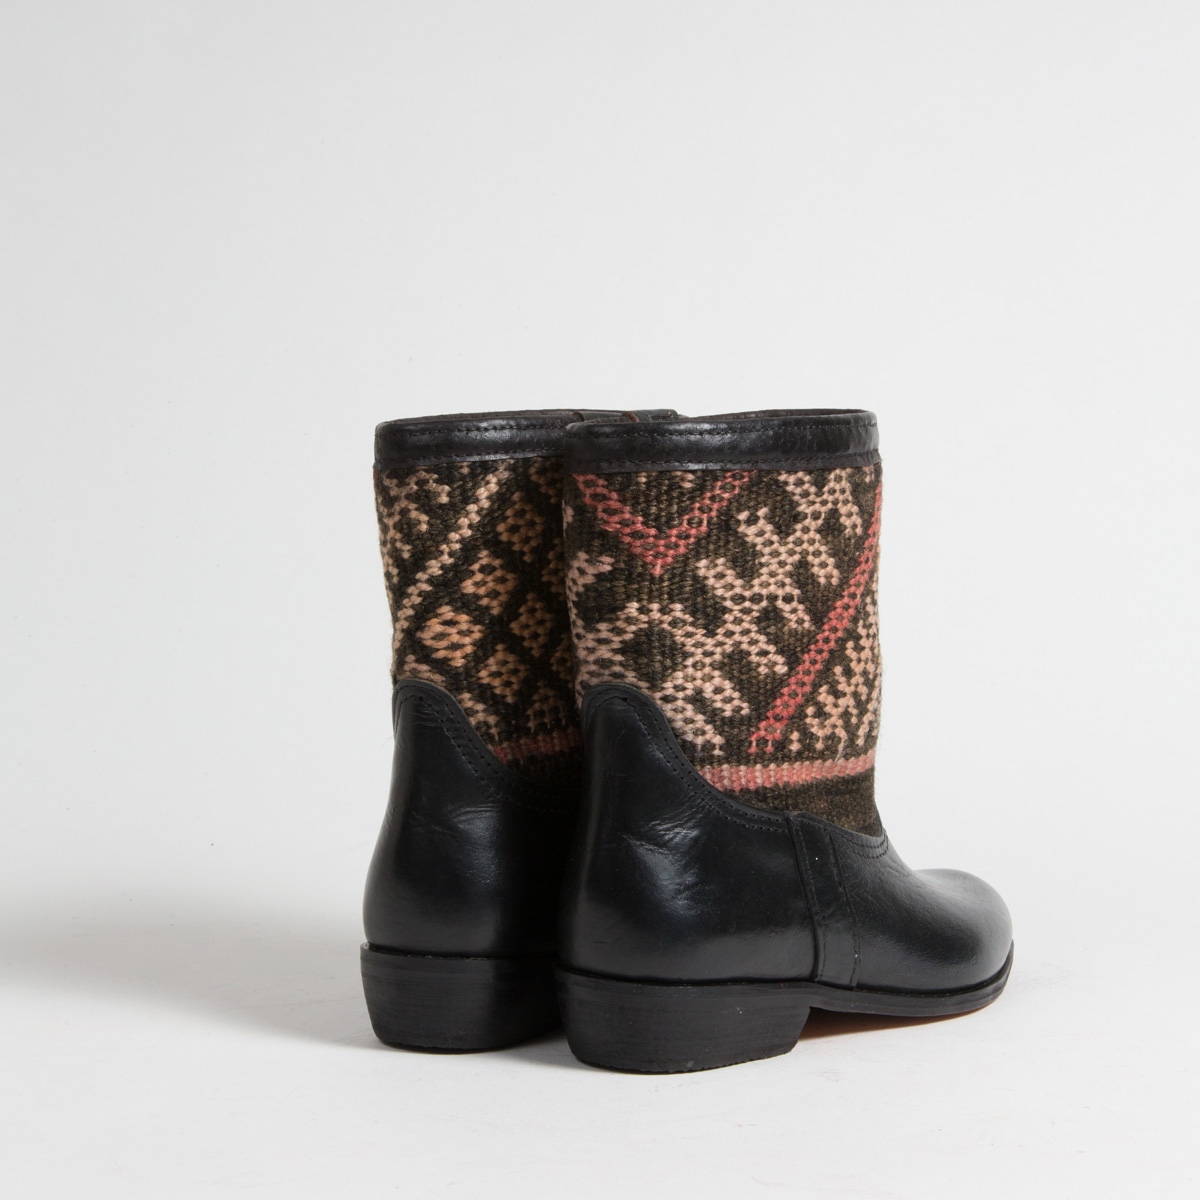 Bottines Kilim cuir mababouche artisanales (Réf. RPN9-38)